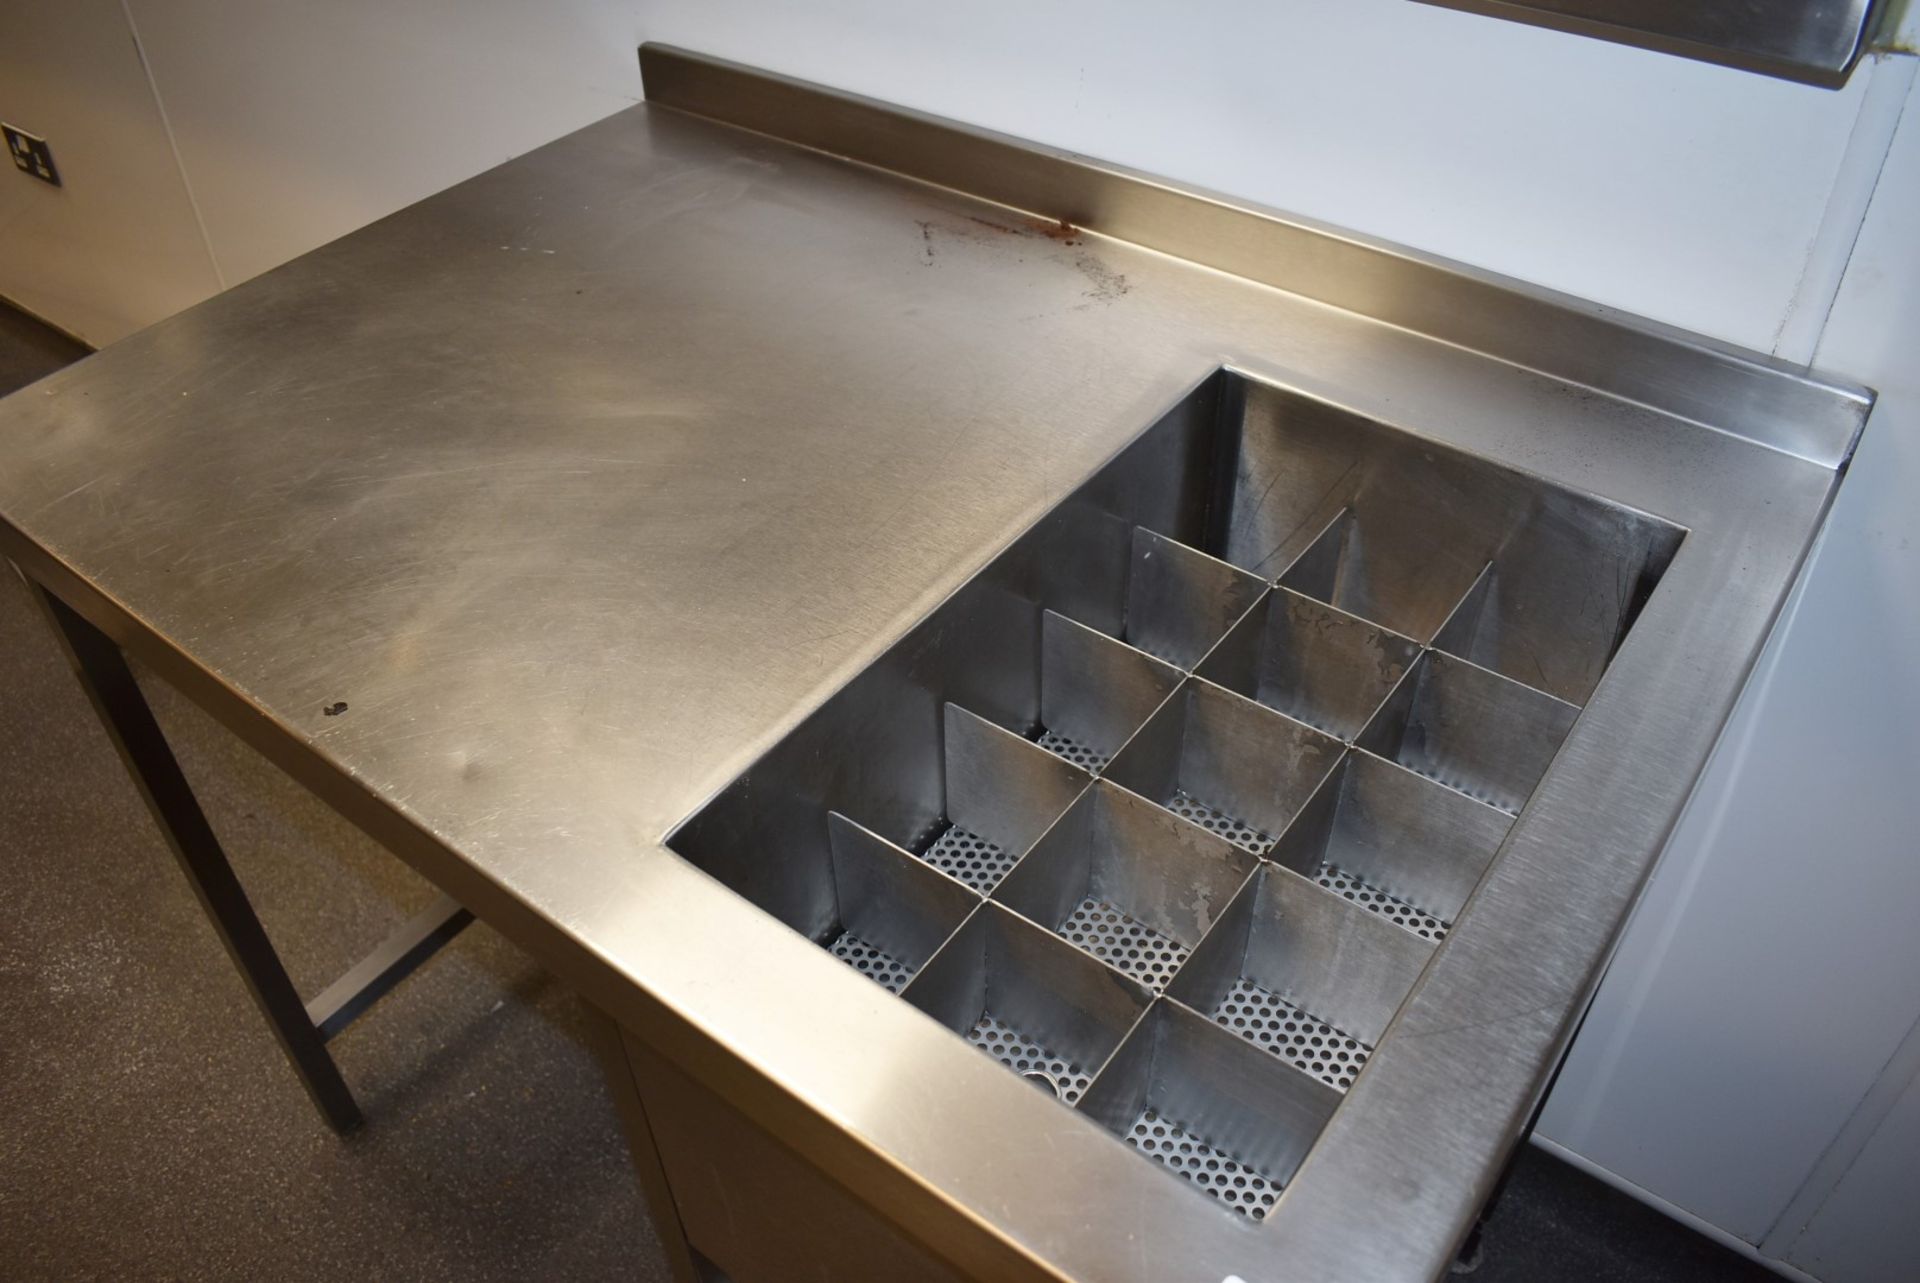 1 x Stainless Steel Prep Table With Integrated Ice Well and Sauce Bottle Dividers - Image 7 of 7